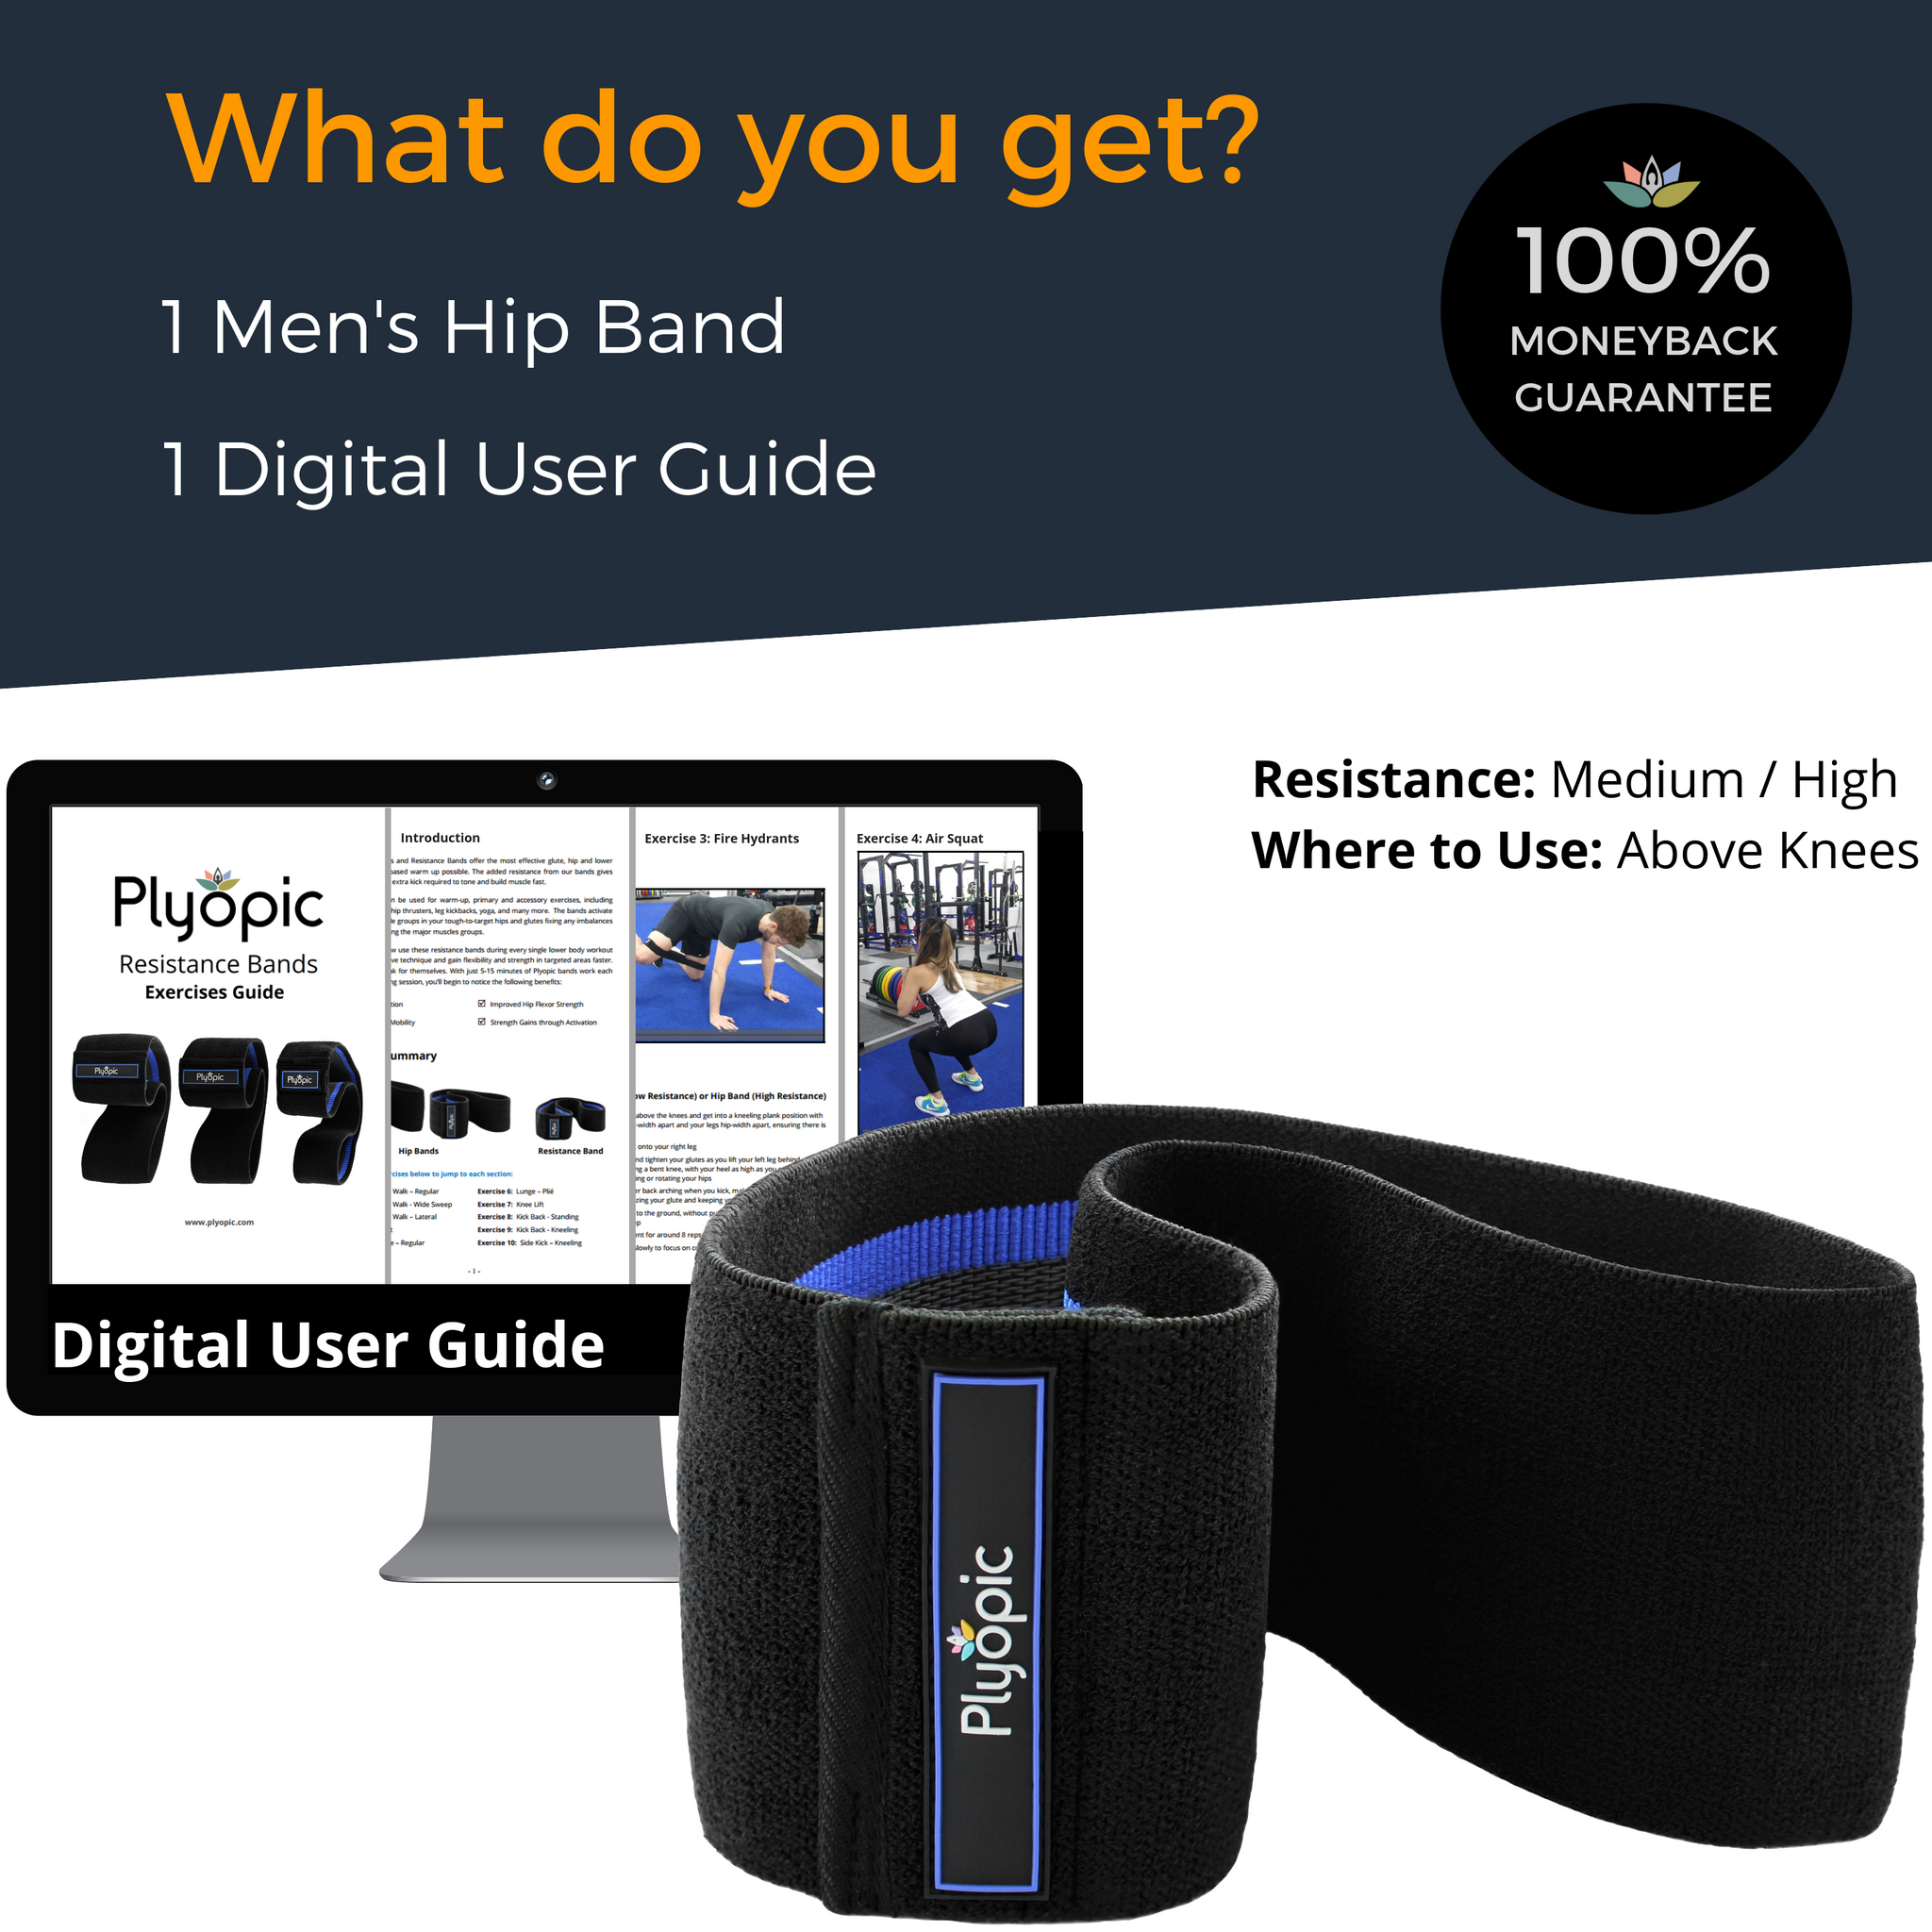 Plyopic-Men's Hip Band (For Upper Legs)-Hip Resistance Band and Digital User Guide